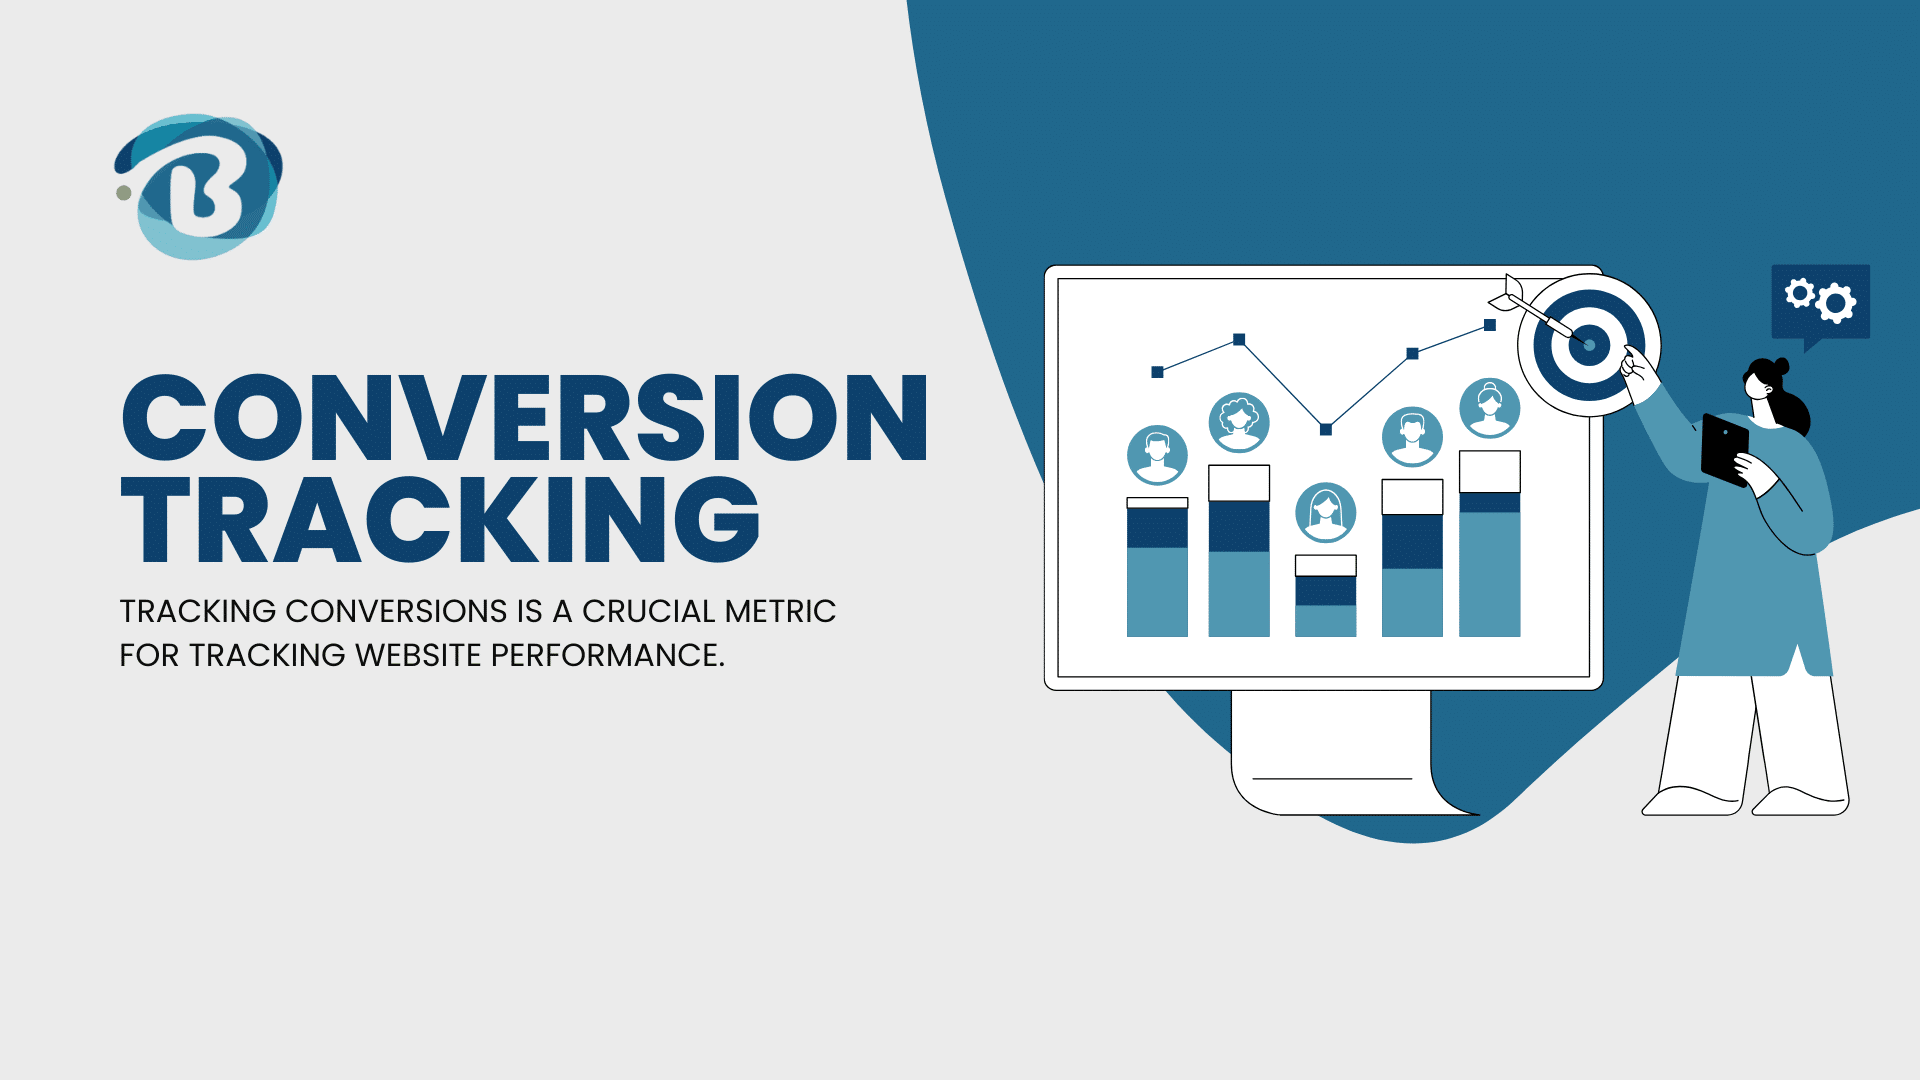 Conversion tracking